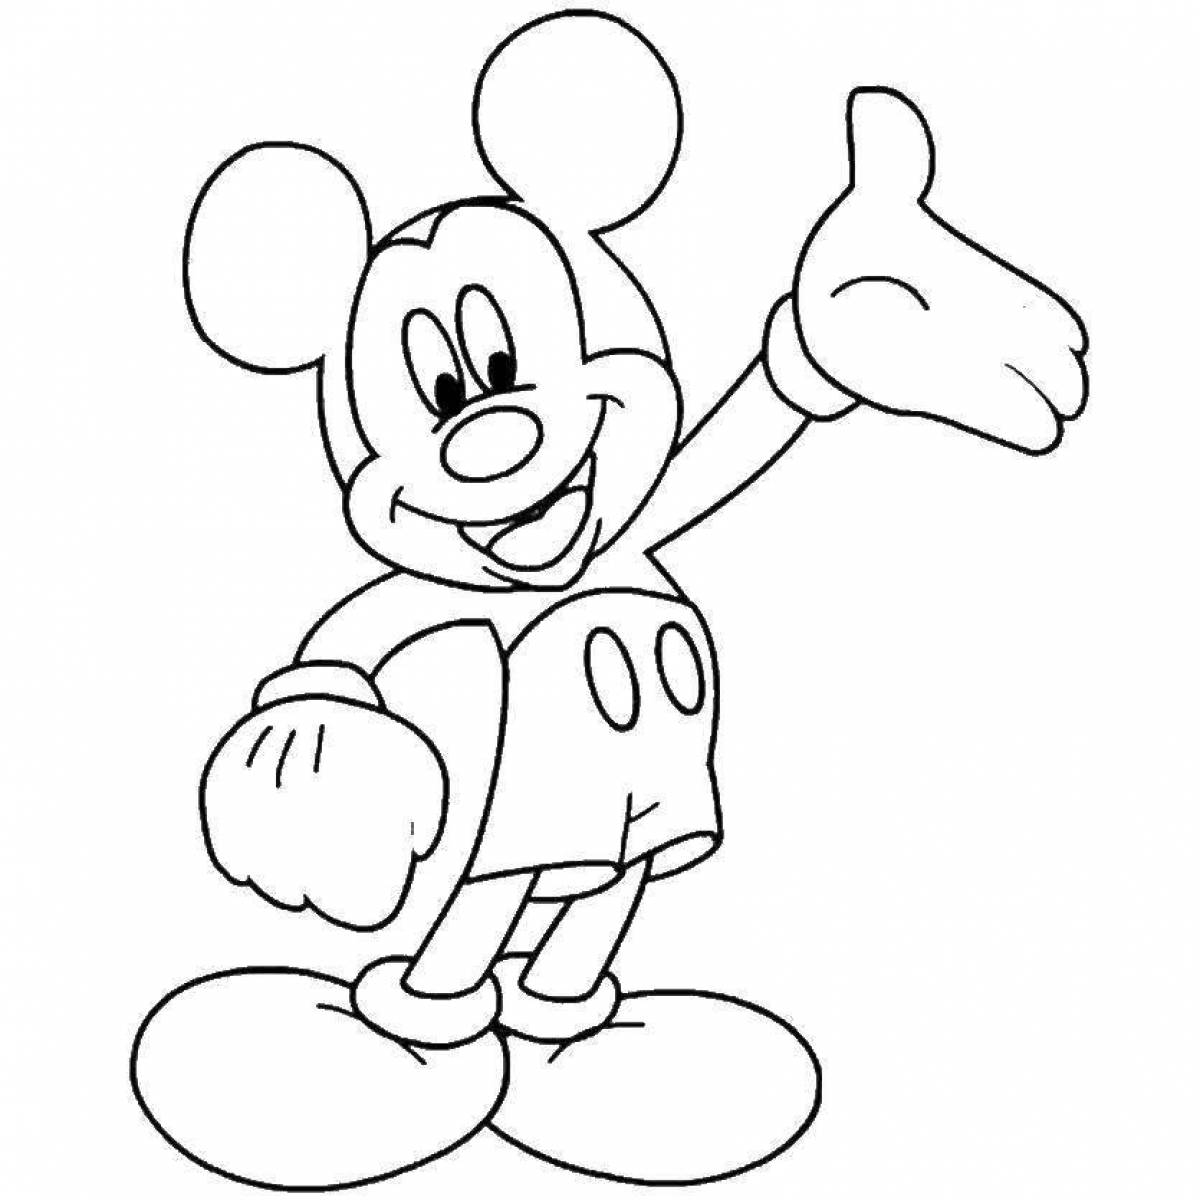 Coloring page cheeky mickey mouse